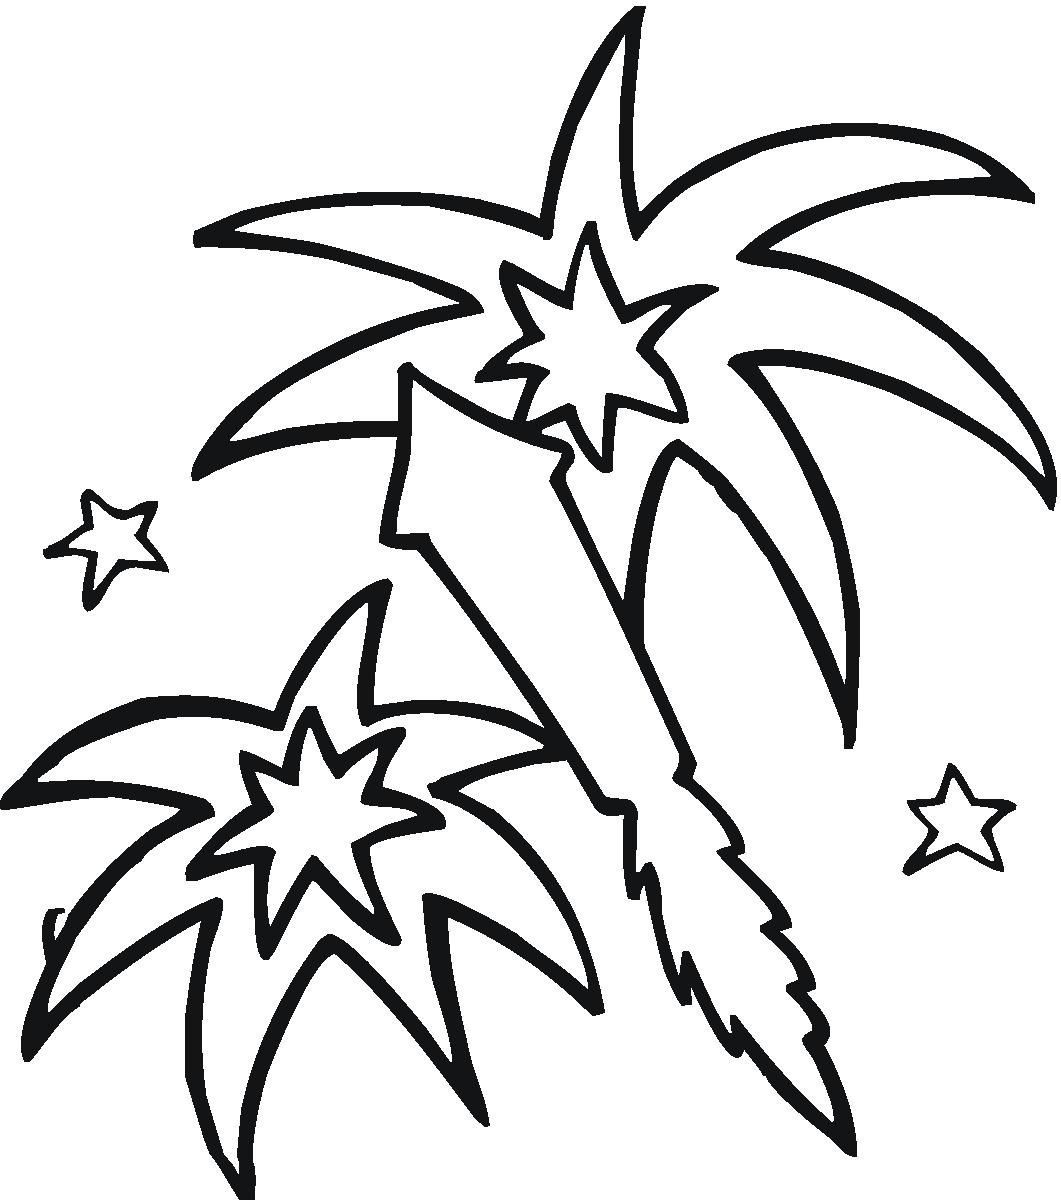 Free coloring pages of firework clipart image #4140